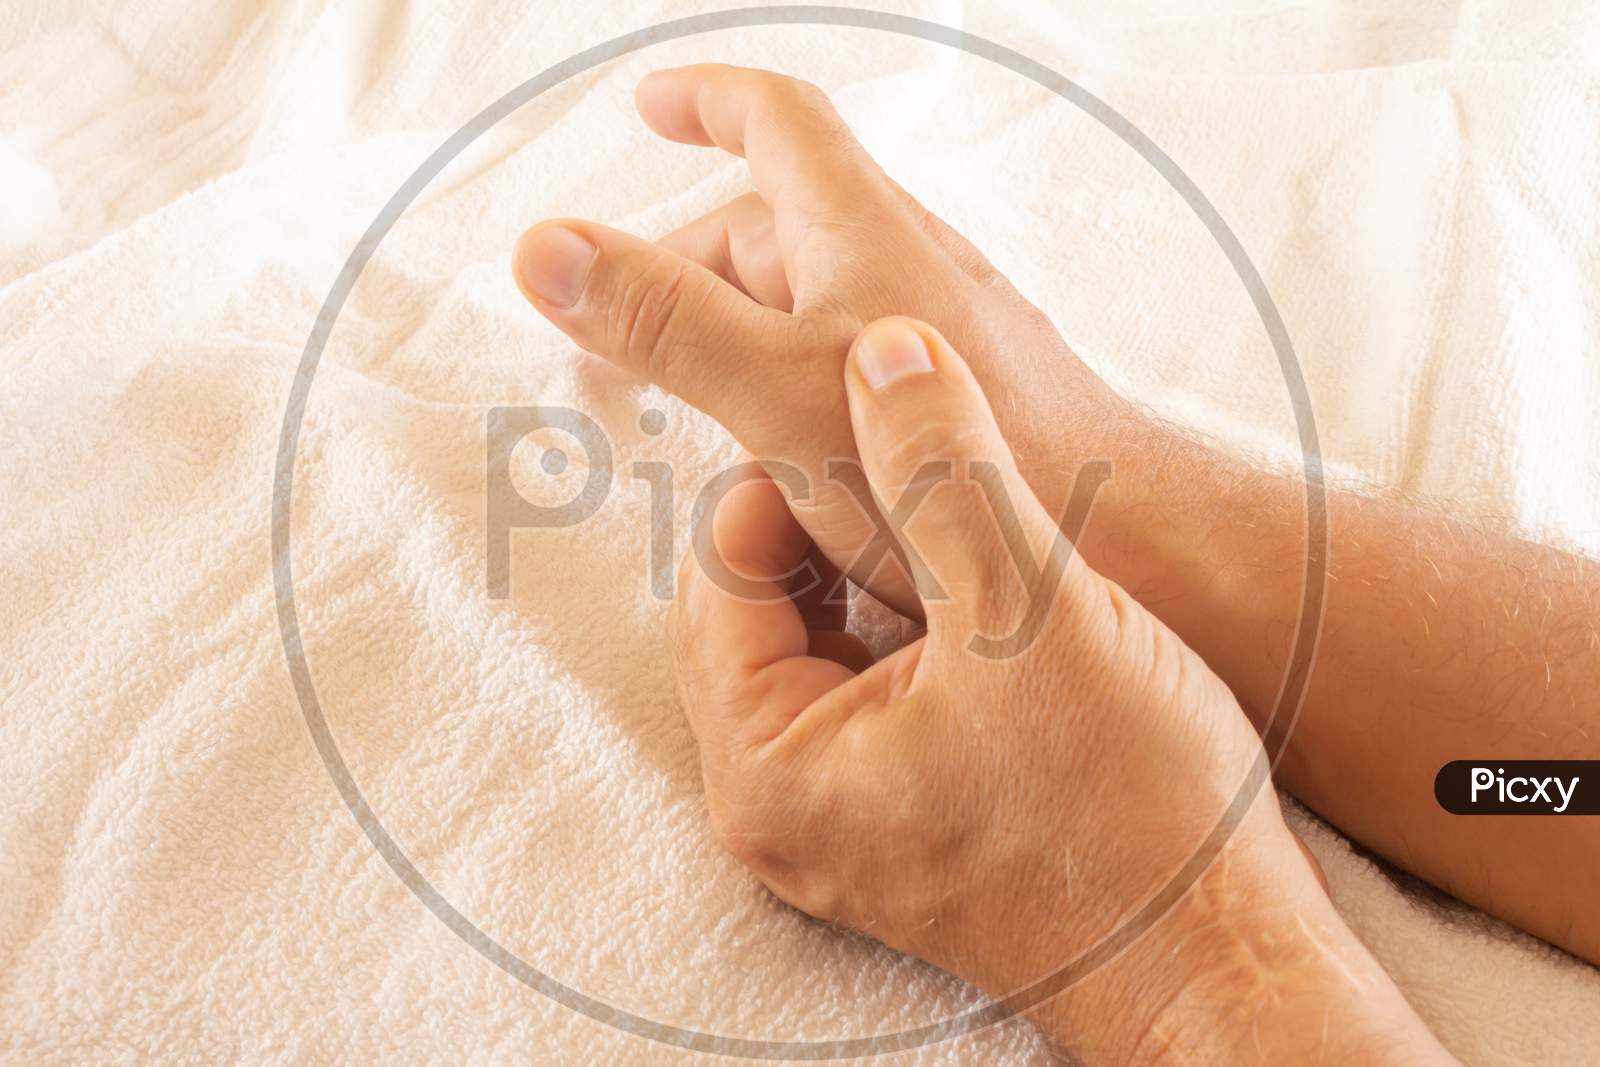 Adult Man With Pain In The Hands. Joint Pain In Young Adults. Hands Calming The Pain.